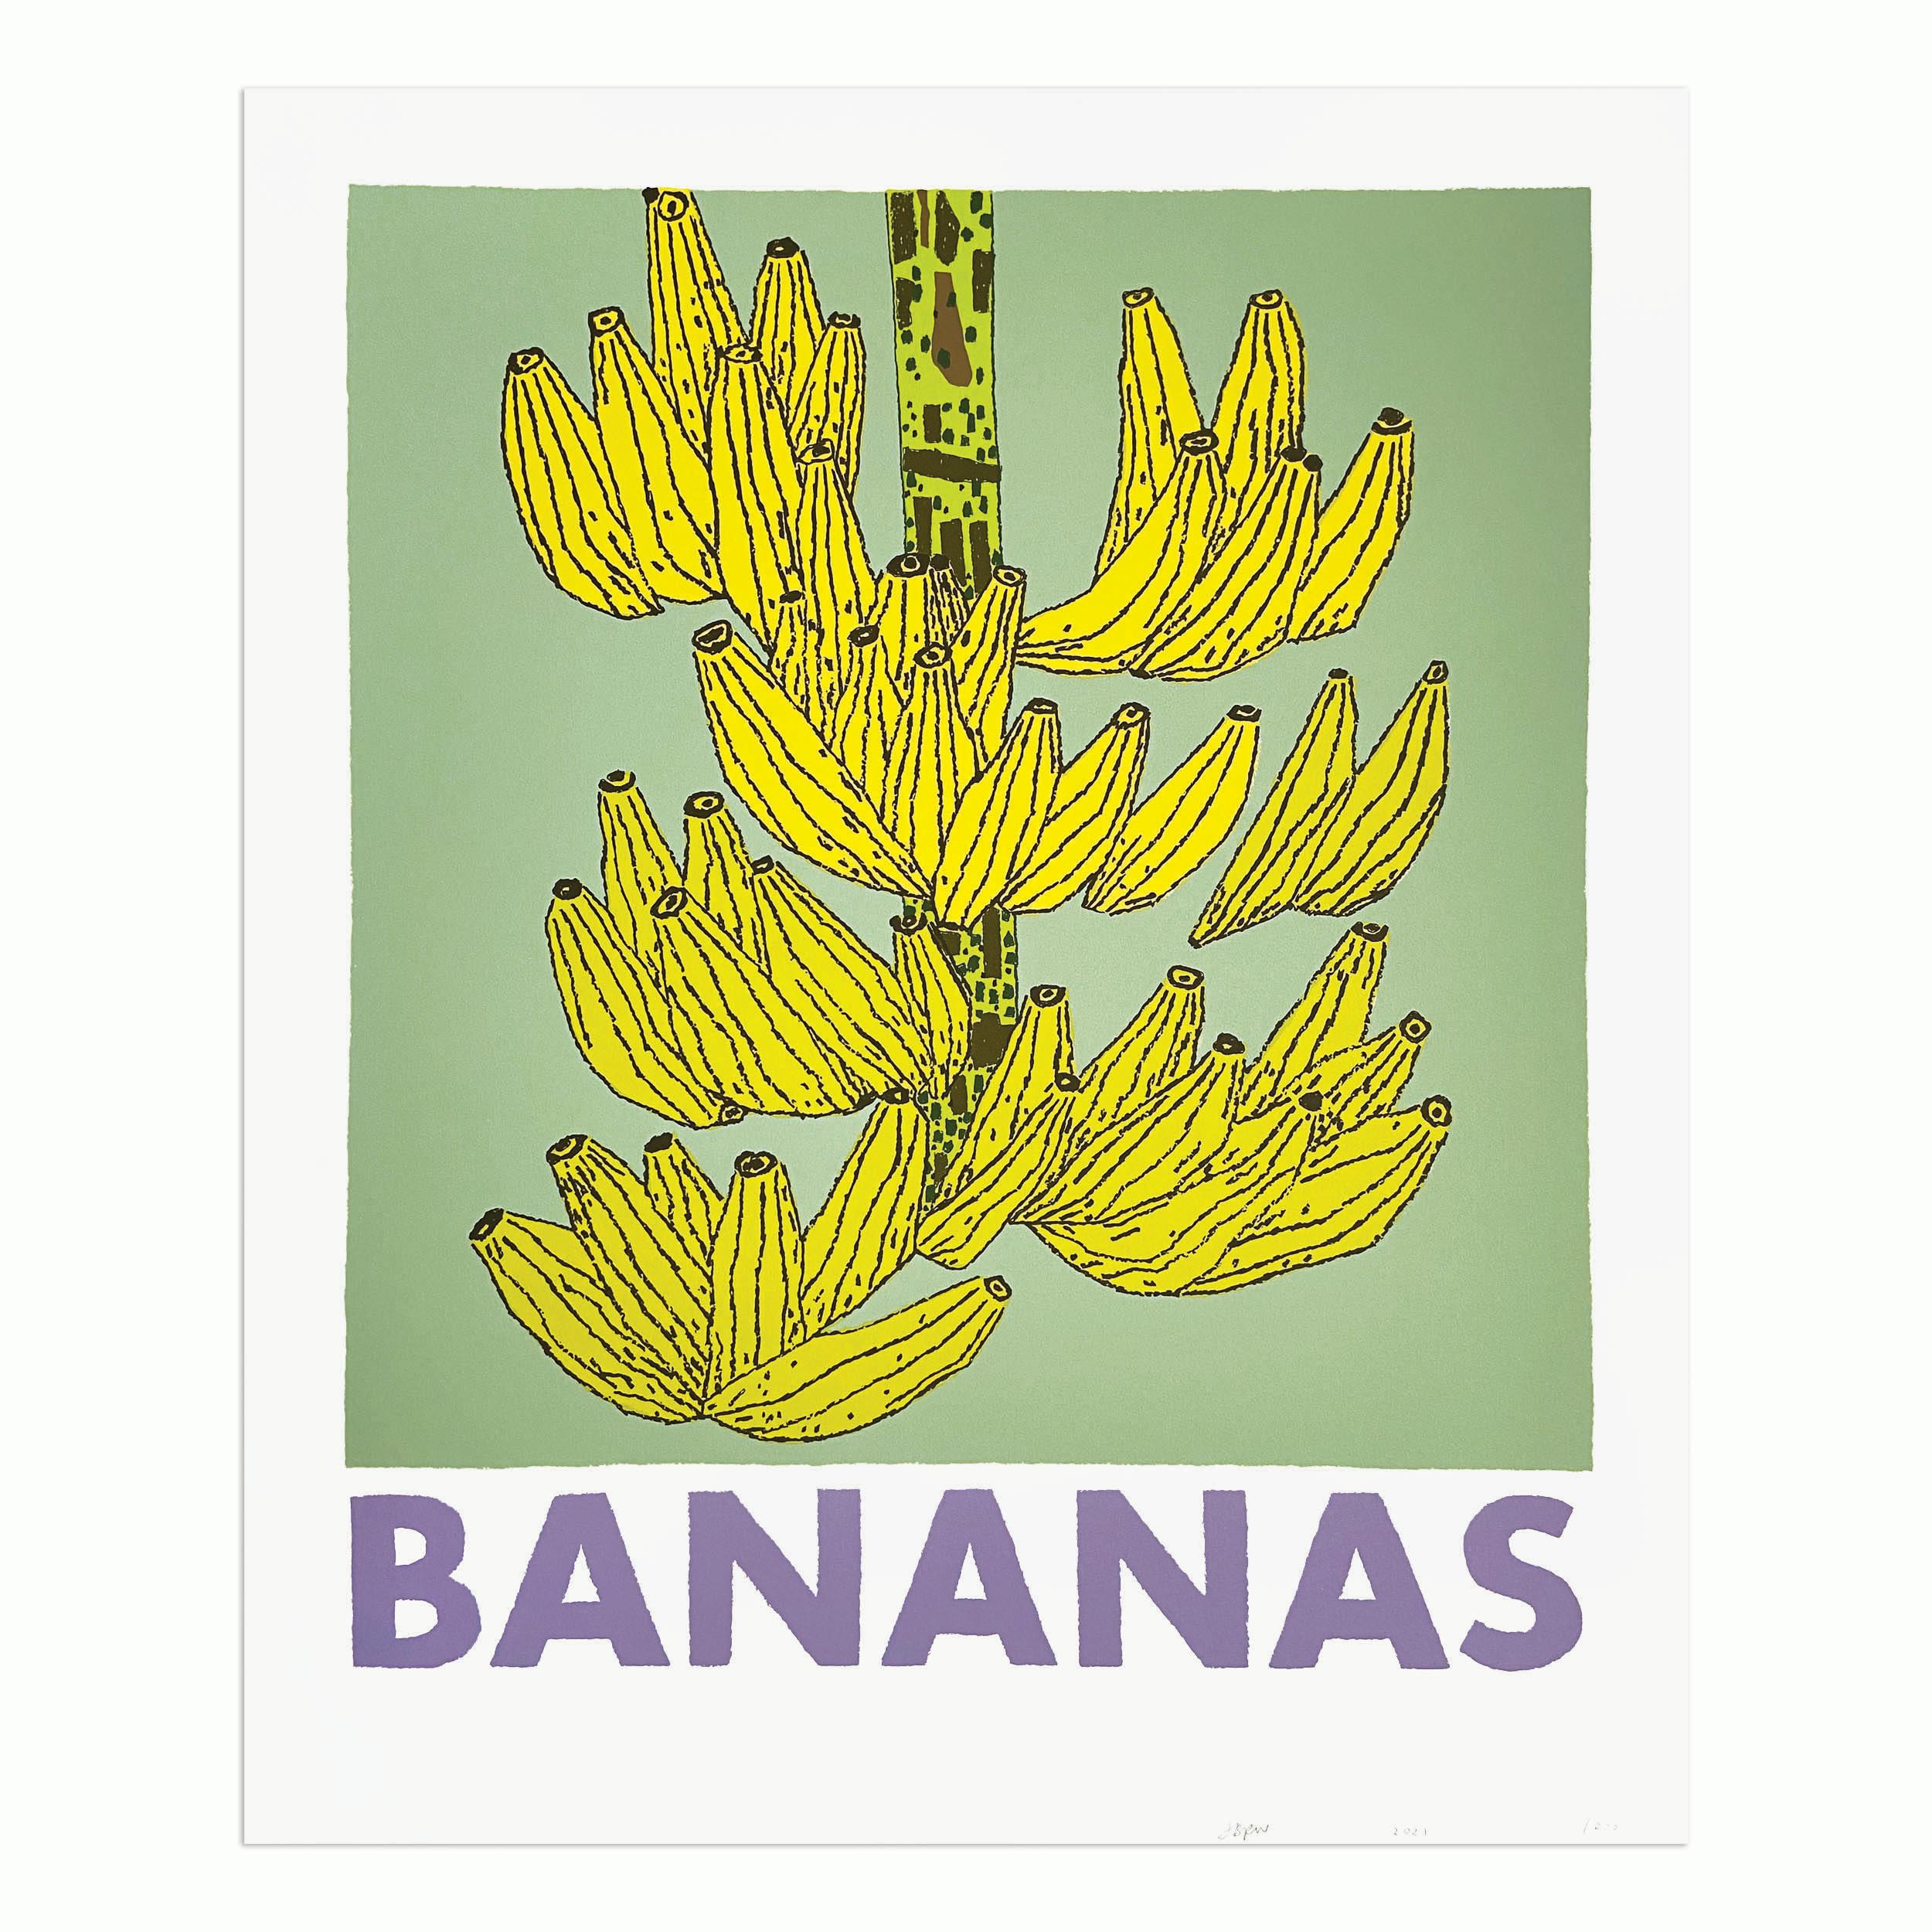 Jonas Wood (American, b. 1977)
Bananas, 2021
Medium: 9-color screen print on rising museum board
Dimensions: 71.1 × 58.4 cm (28 × 23 in)
Edition of 200: Hand-signed and numbered
Condition: Excellent